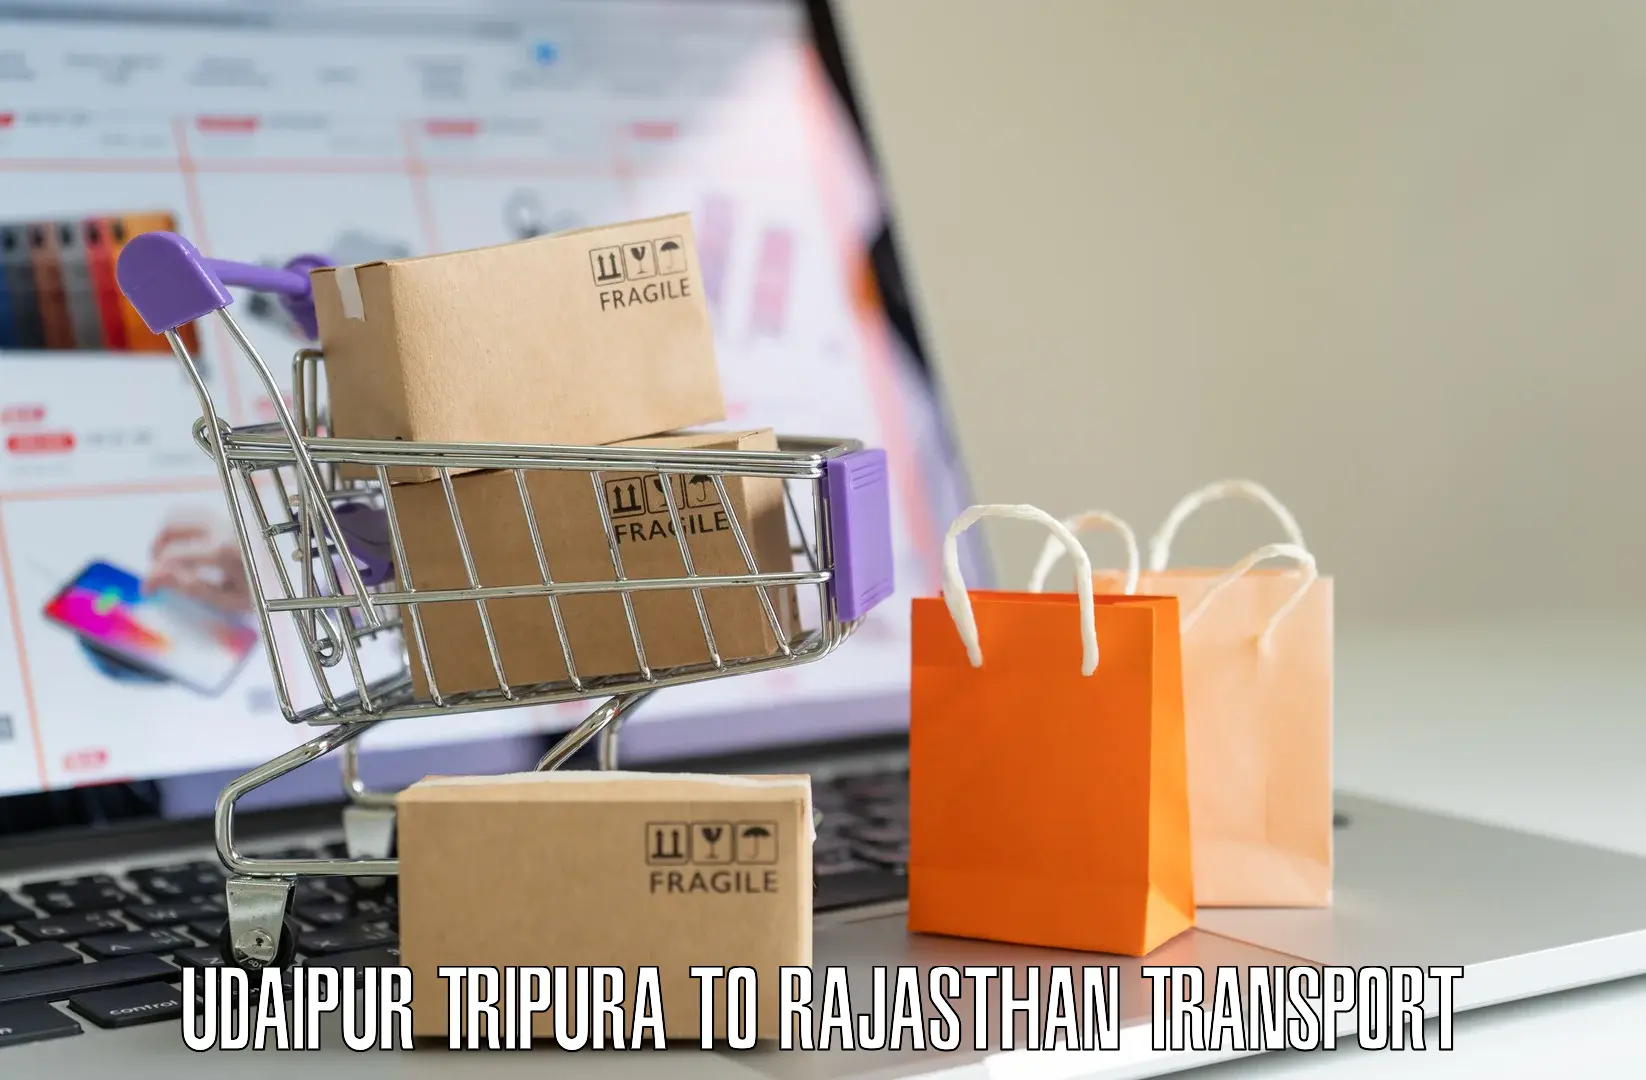 Transport shared services Udaipur Tripura to Rajasthan